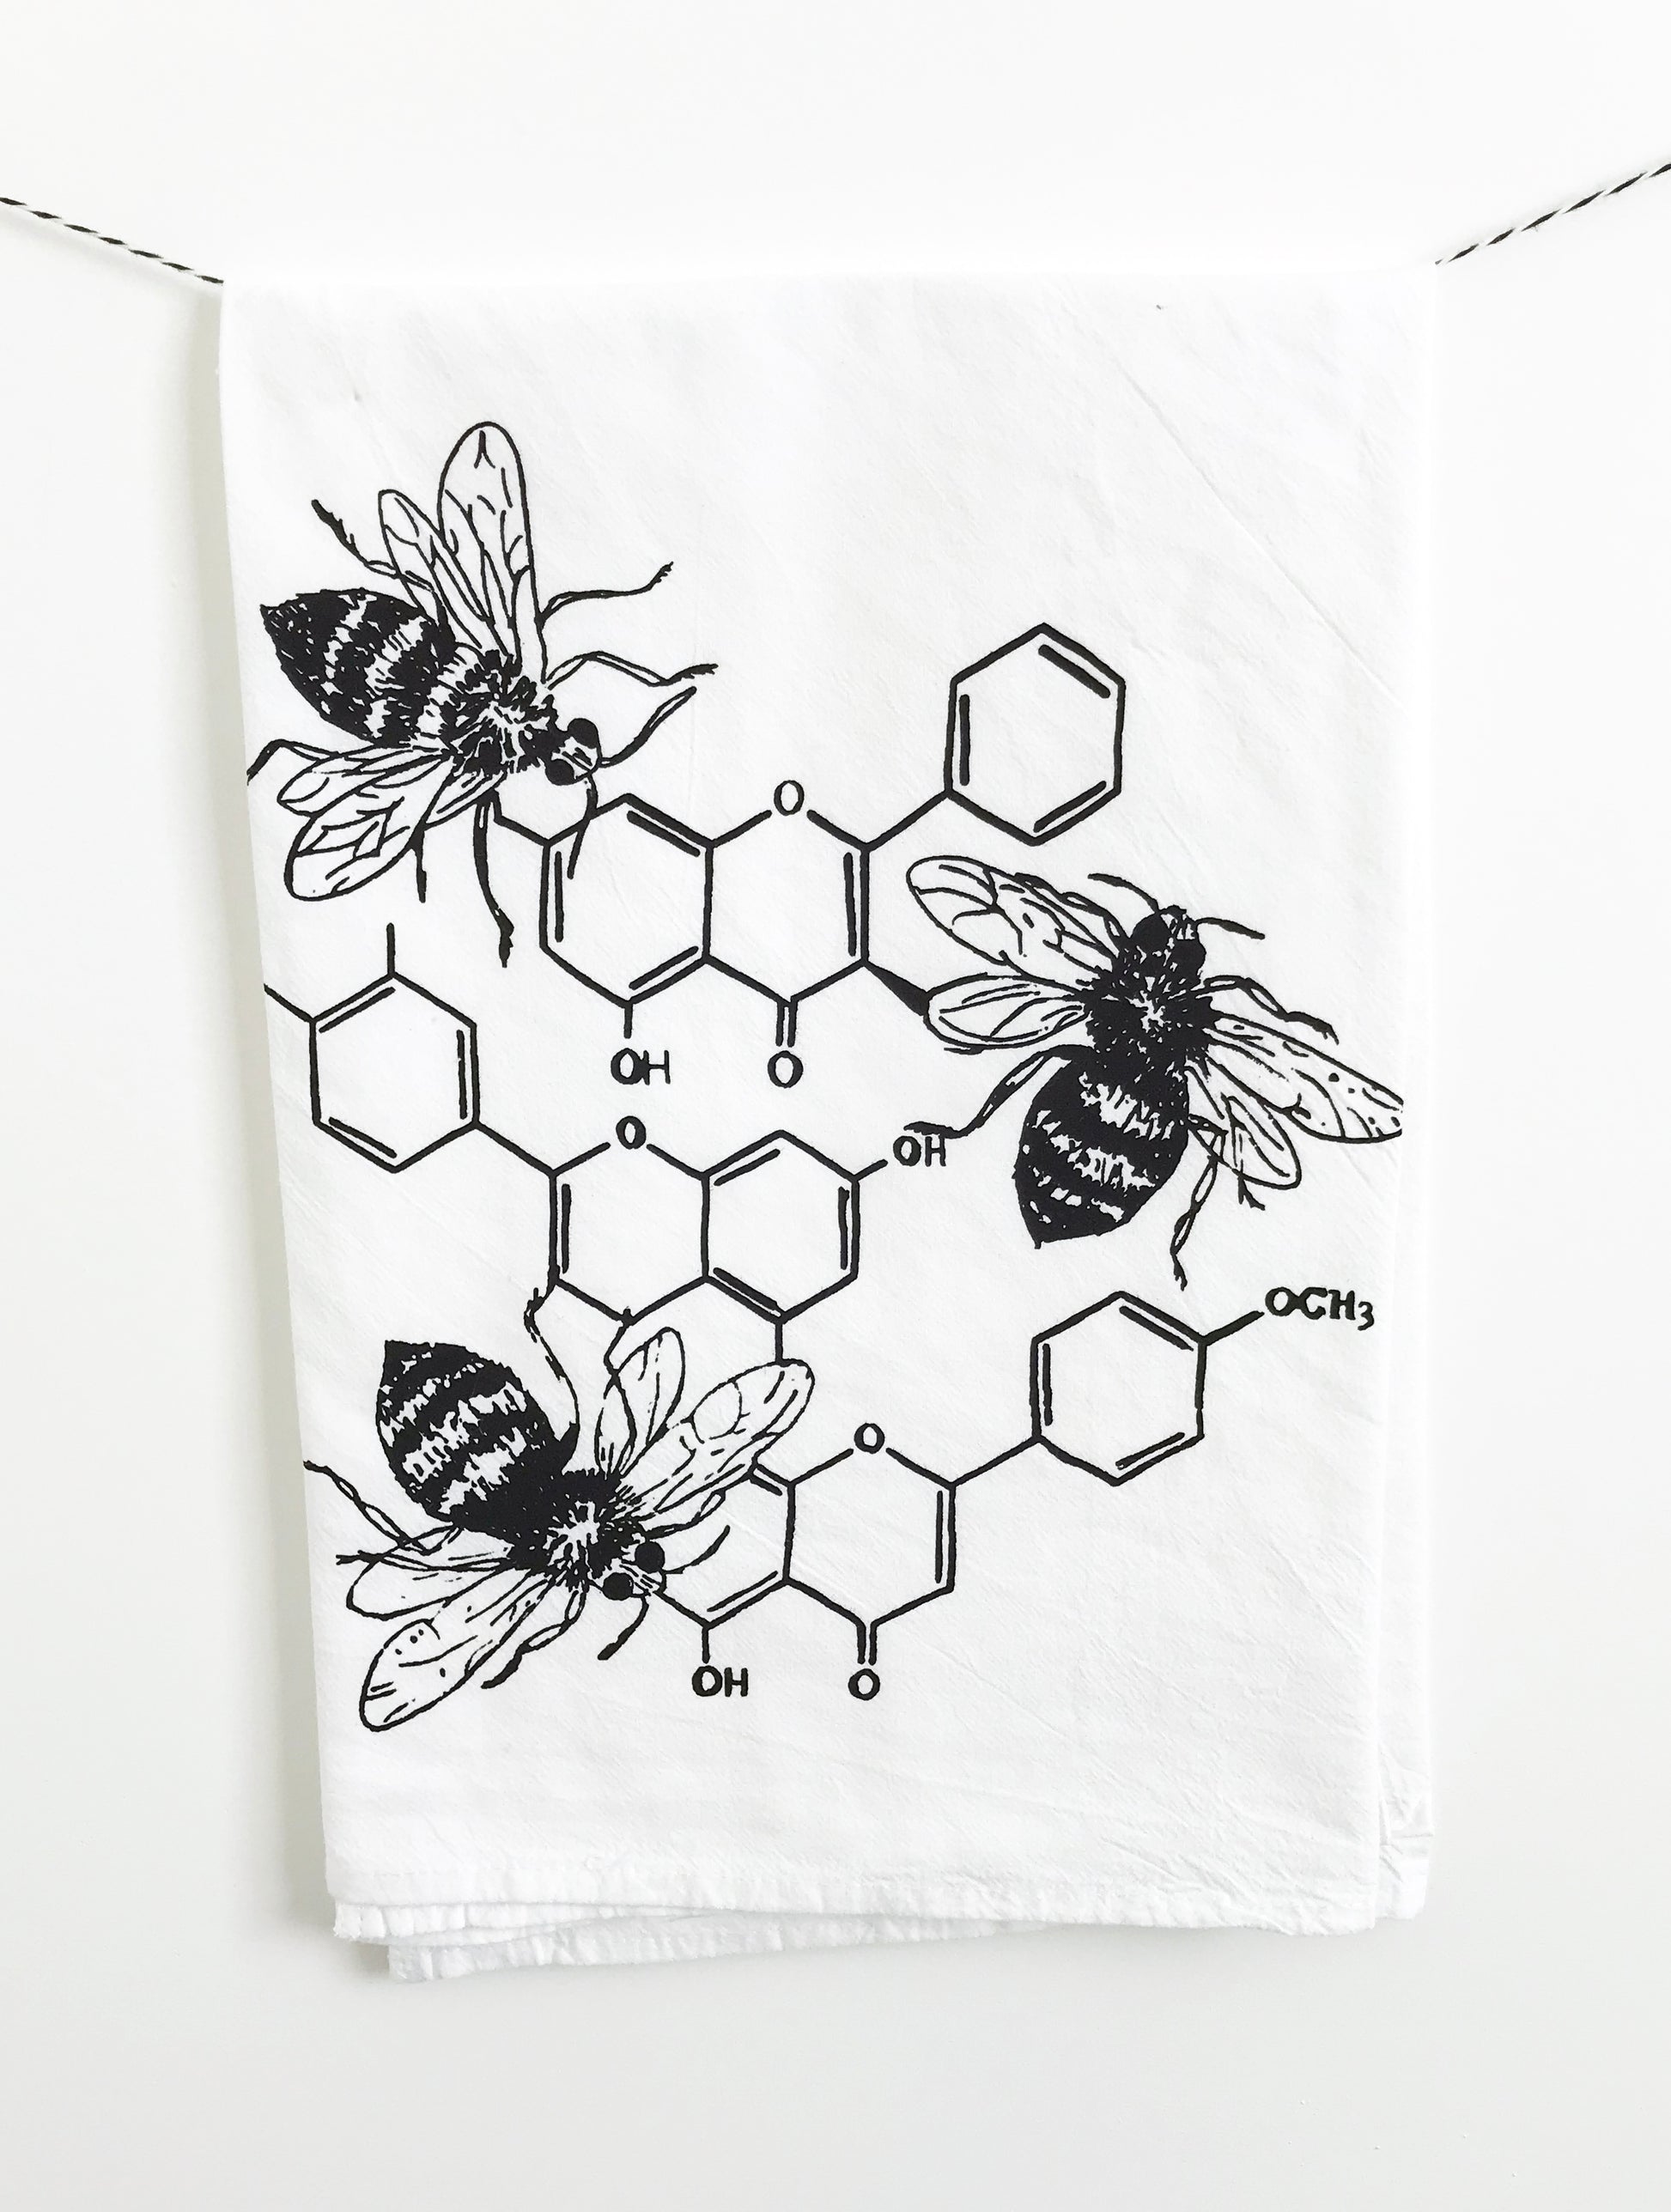 LOT OF Two Kitchen Towels~ “BEE KIND” Cotton ~14” x 24” Honey Bee TOWELS